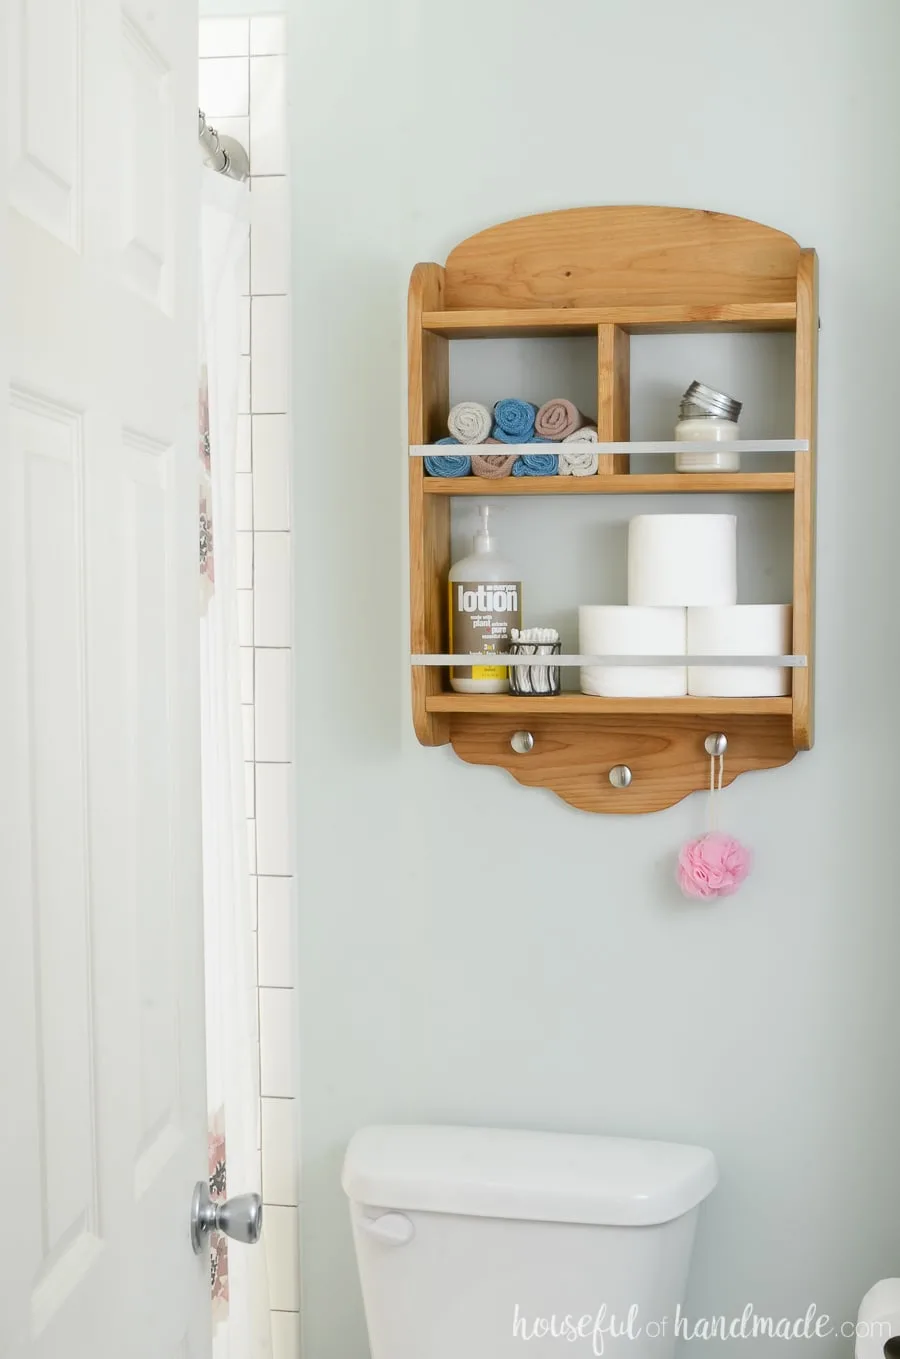 DIY bathroom storage shelves to hang above the toilet for extra storage. Wood shelves holding toilet paper, lotion and wash cloths. 